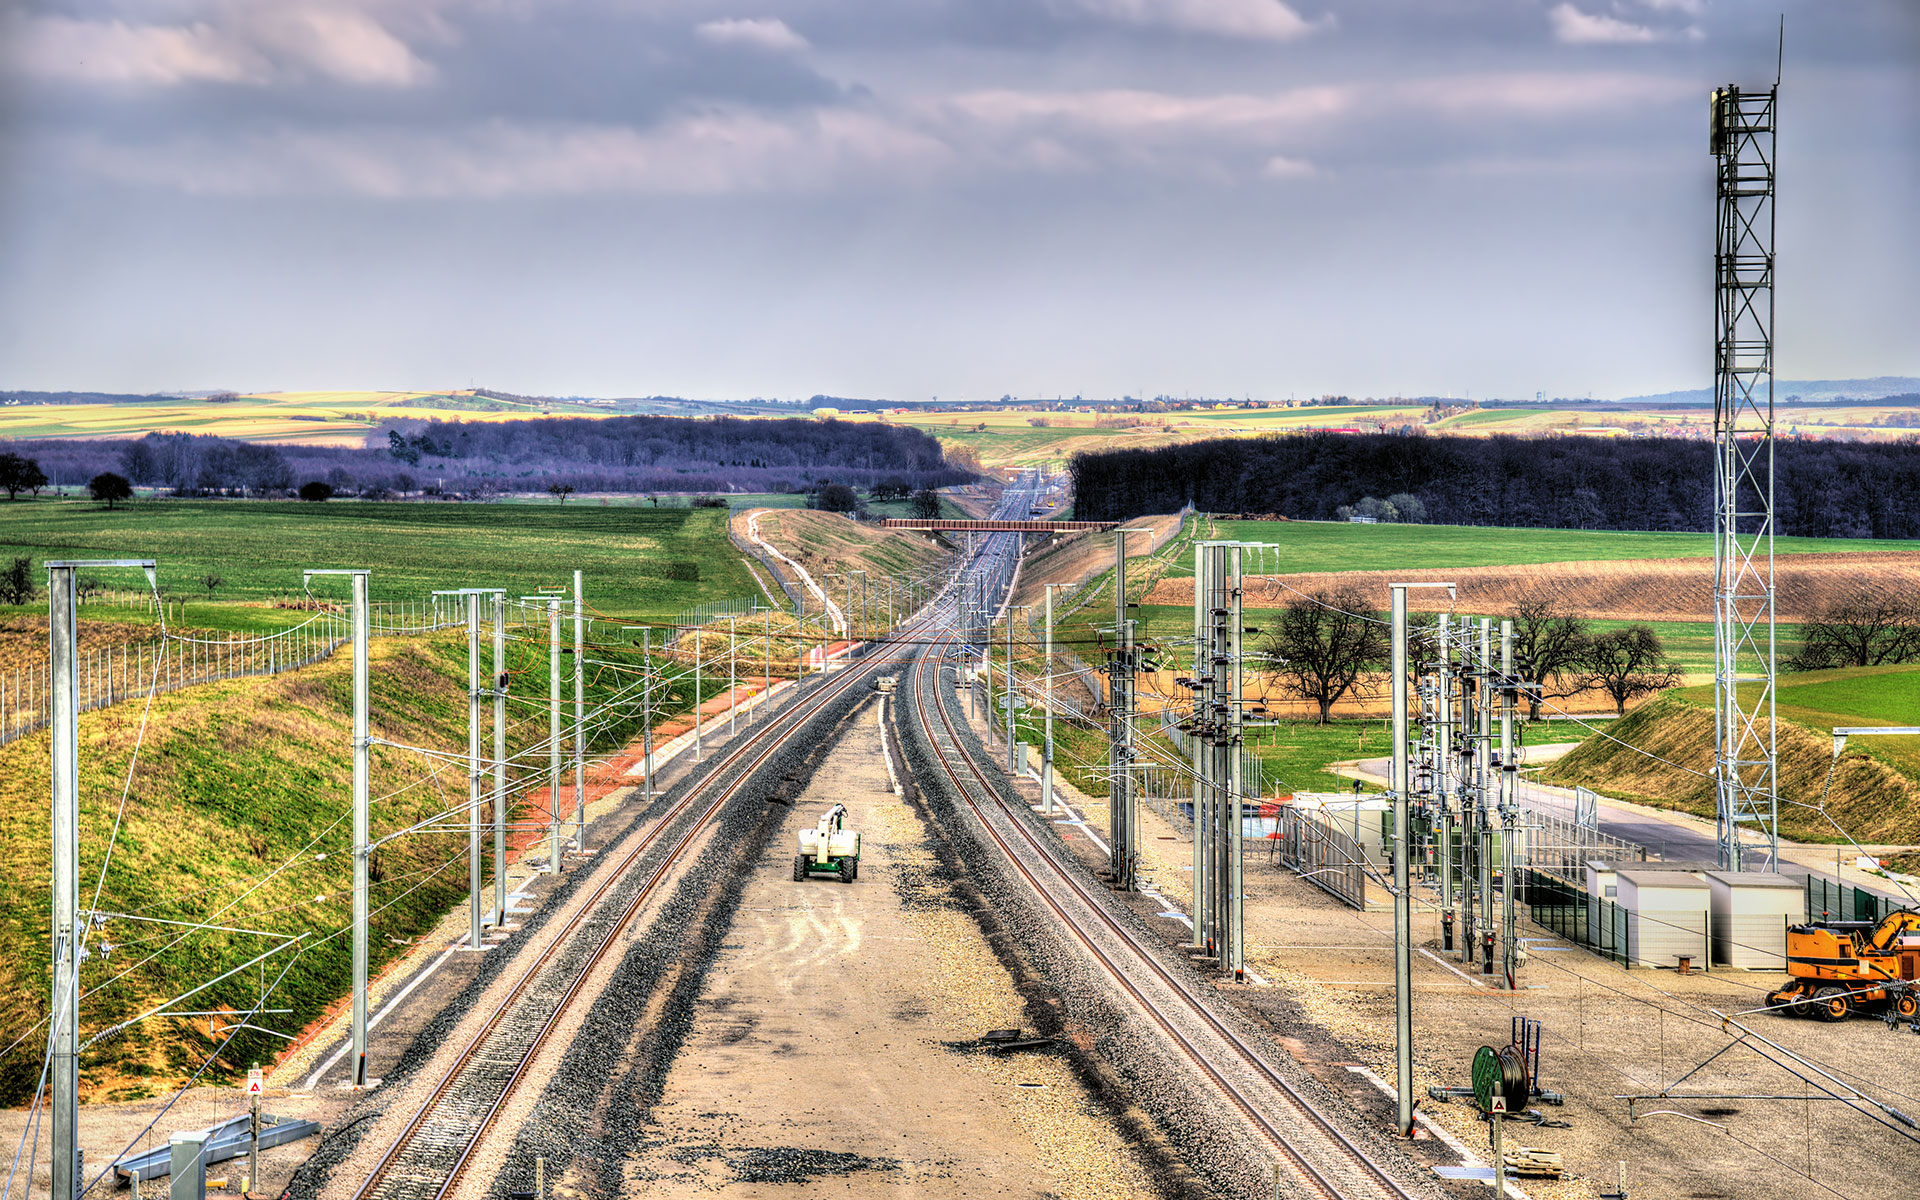 The LGV Est high-speed line will be extended to Strasbourg in April 2016 (photo © Leonid Andronov / dreamstime.com)